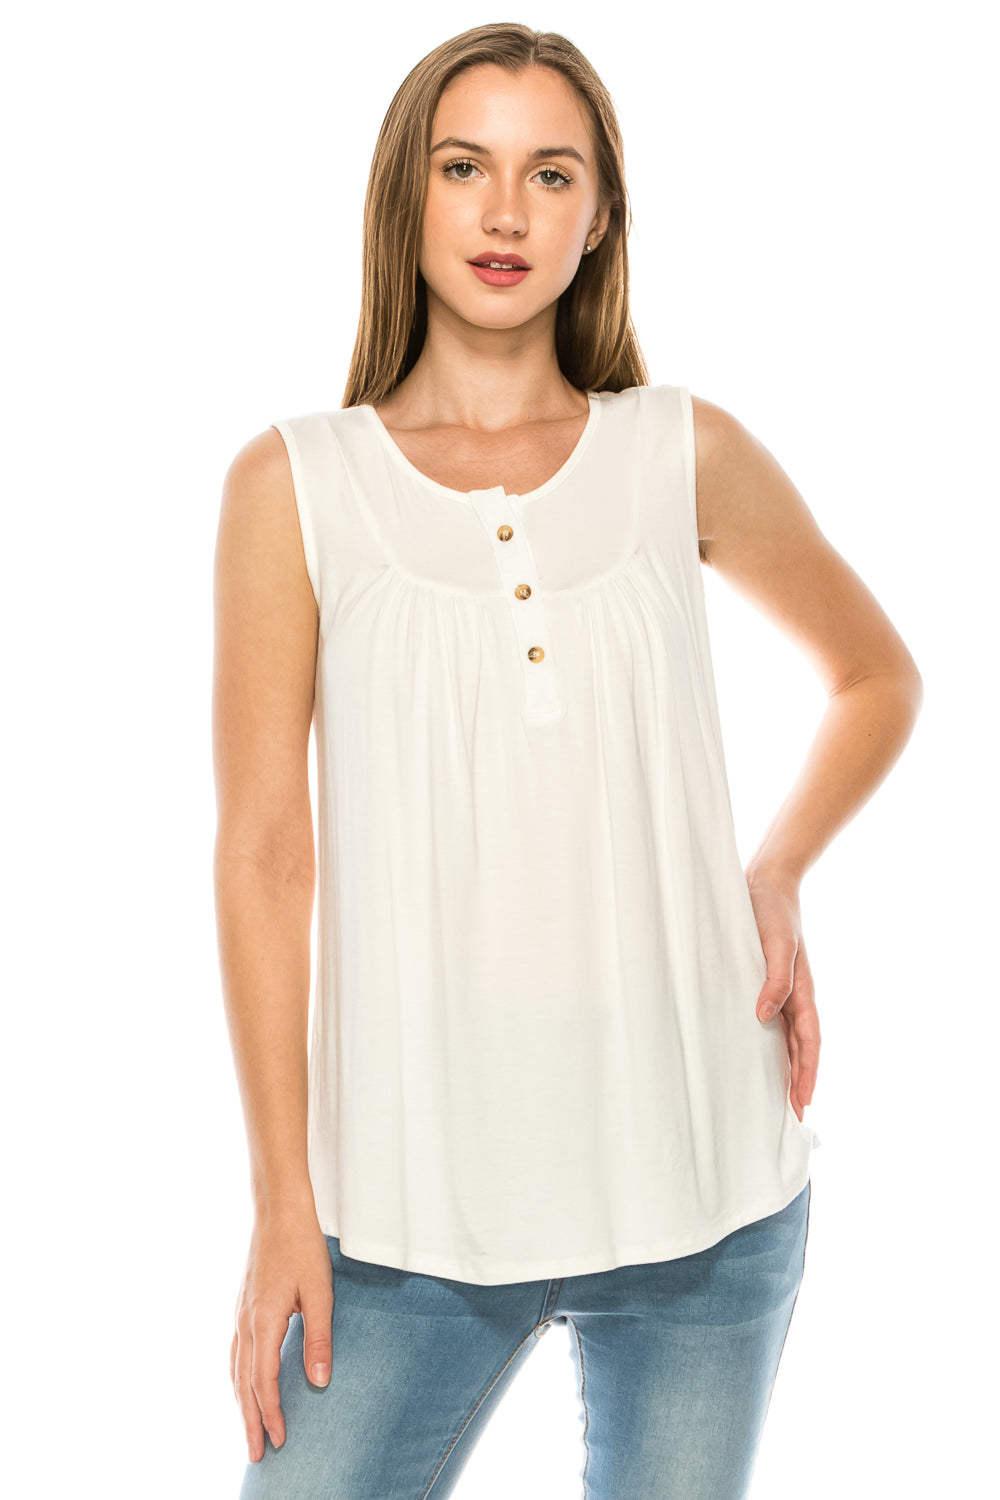 Made in USA Sleeveless Tops Round Neck Soft T-Shirts Tunic Button up Casual Blouses - annva-usa